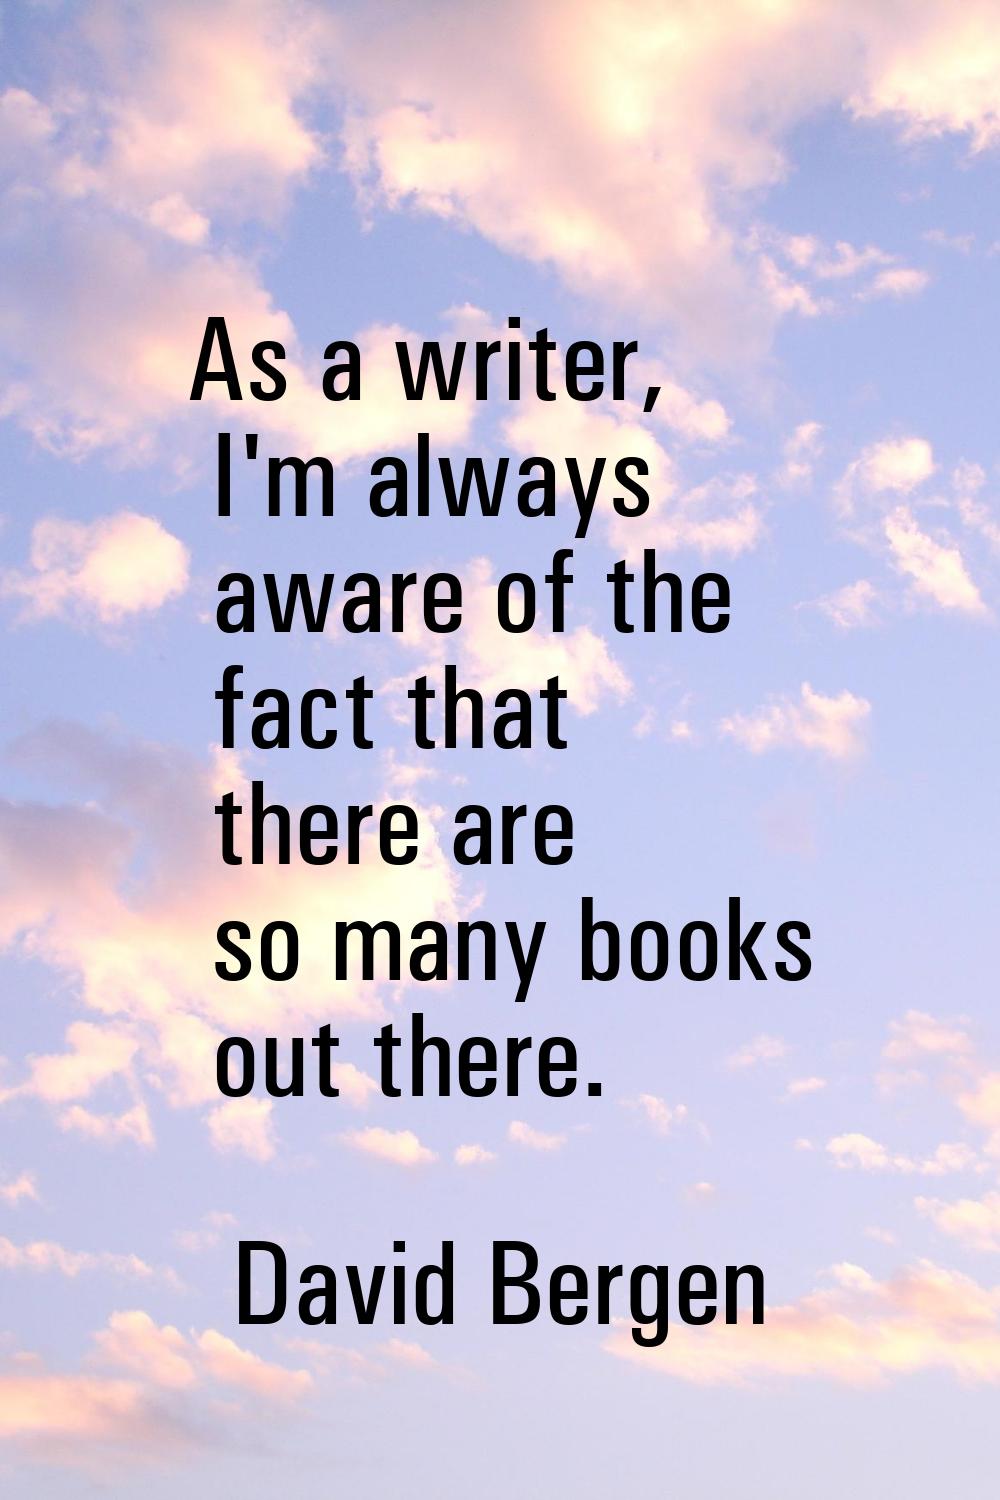 As a writer, I'm always aware of the fact that there are so many books out there.